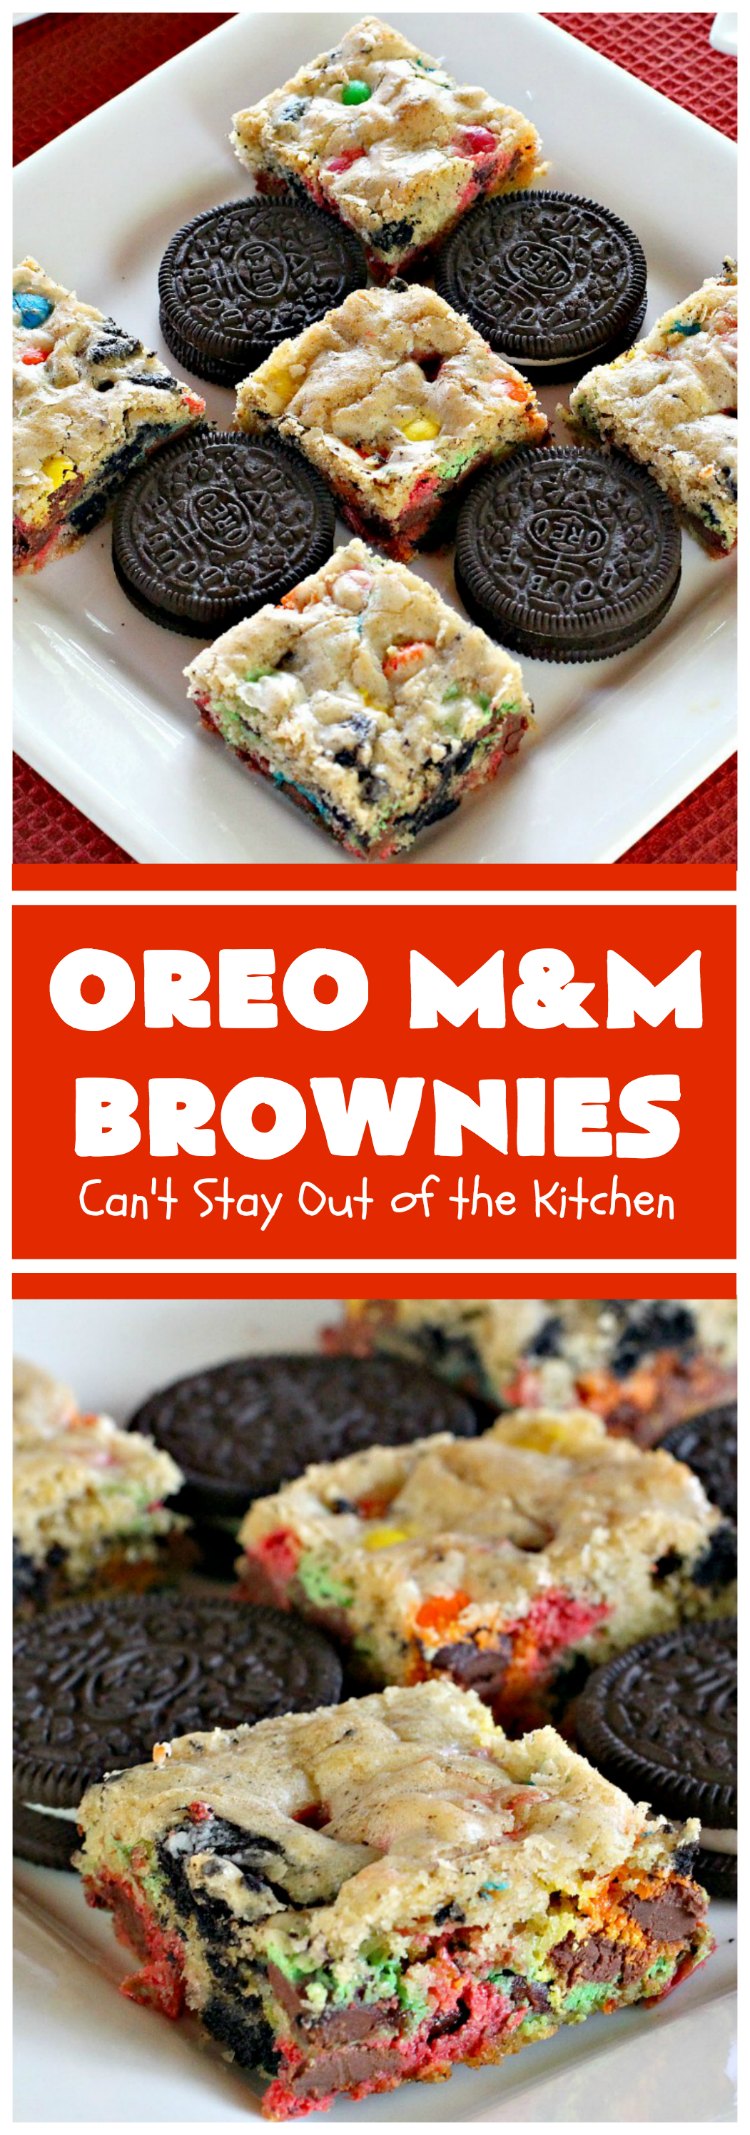 Oreo M&M Brownies | Can't Stay Out of the Kitchen